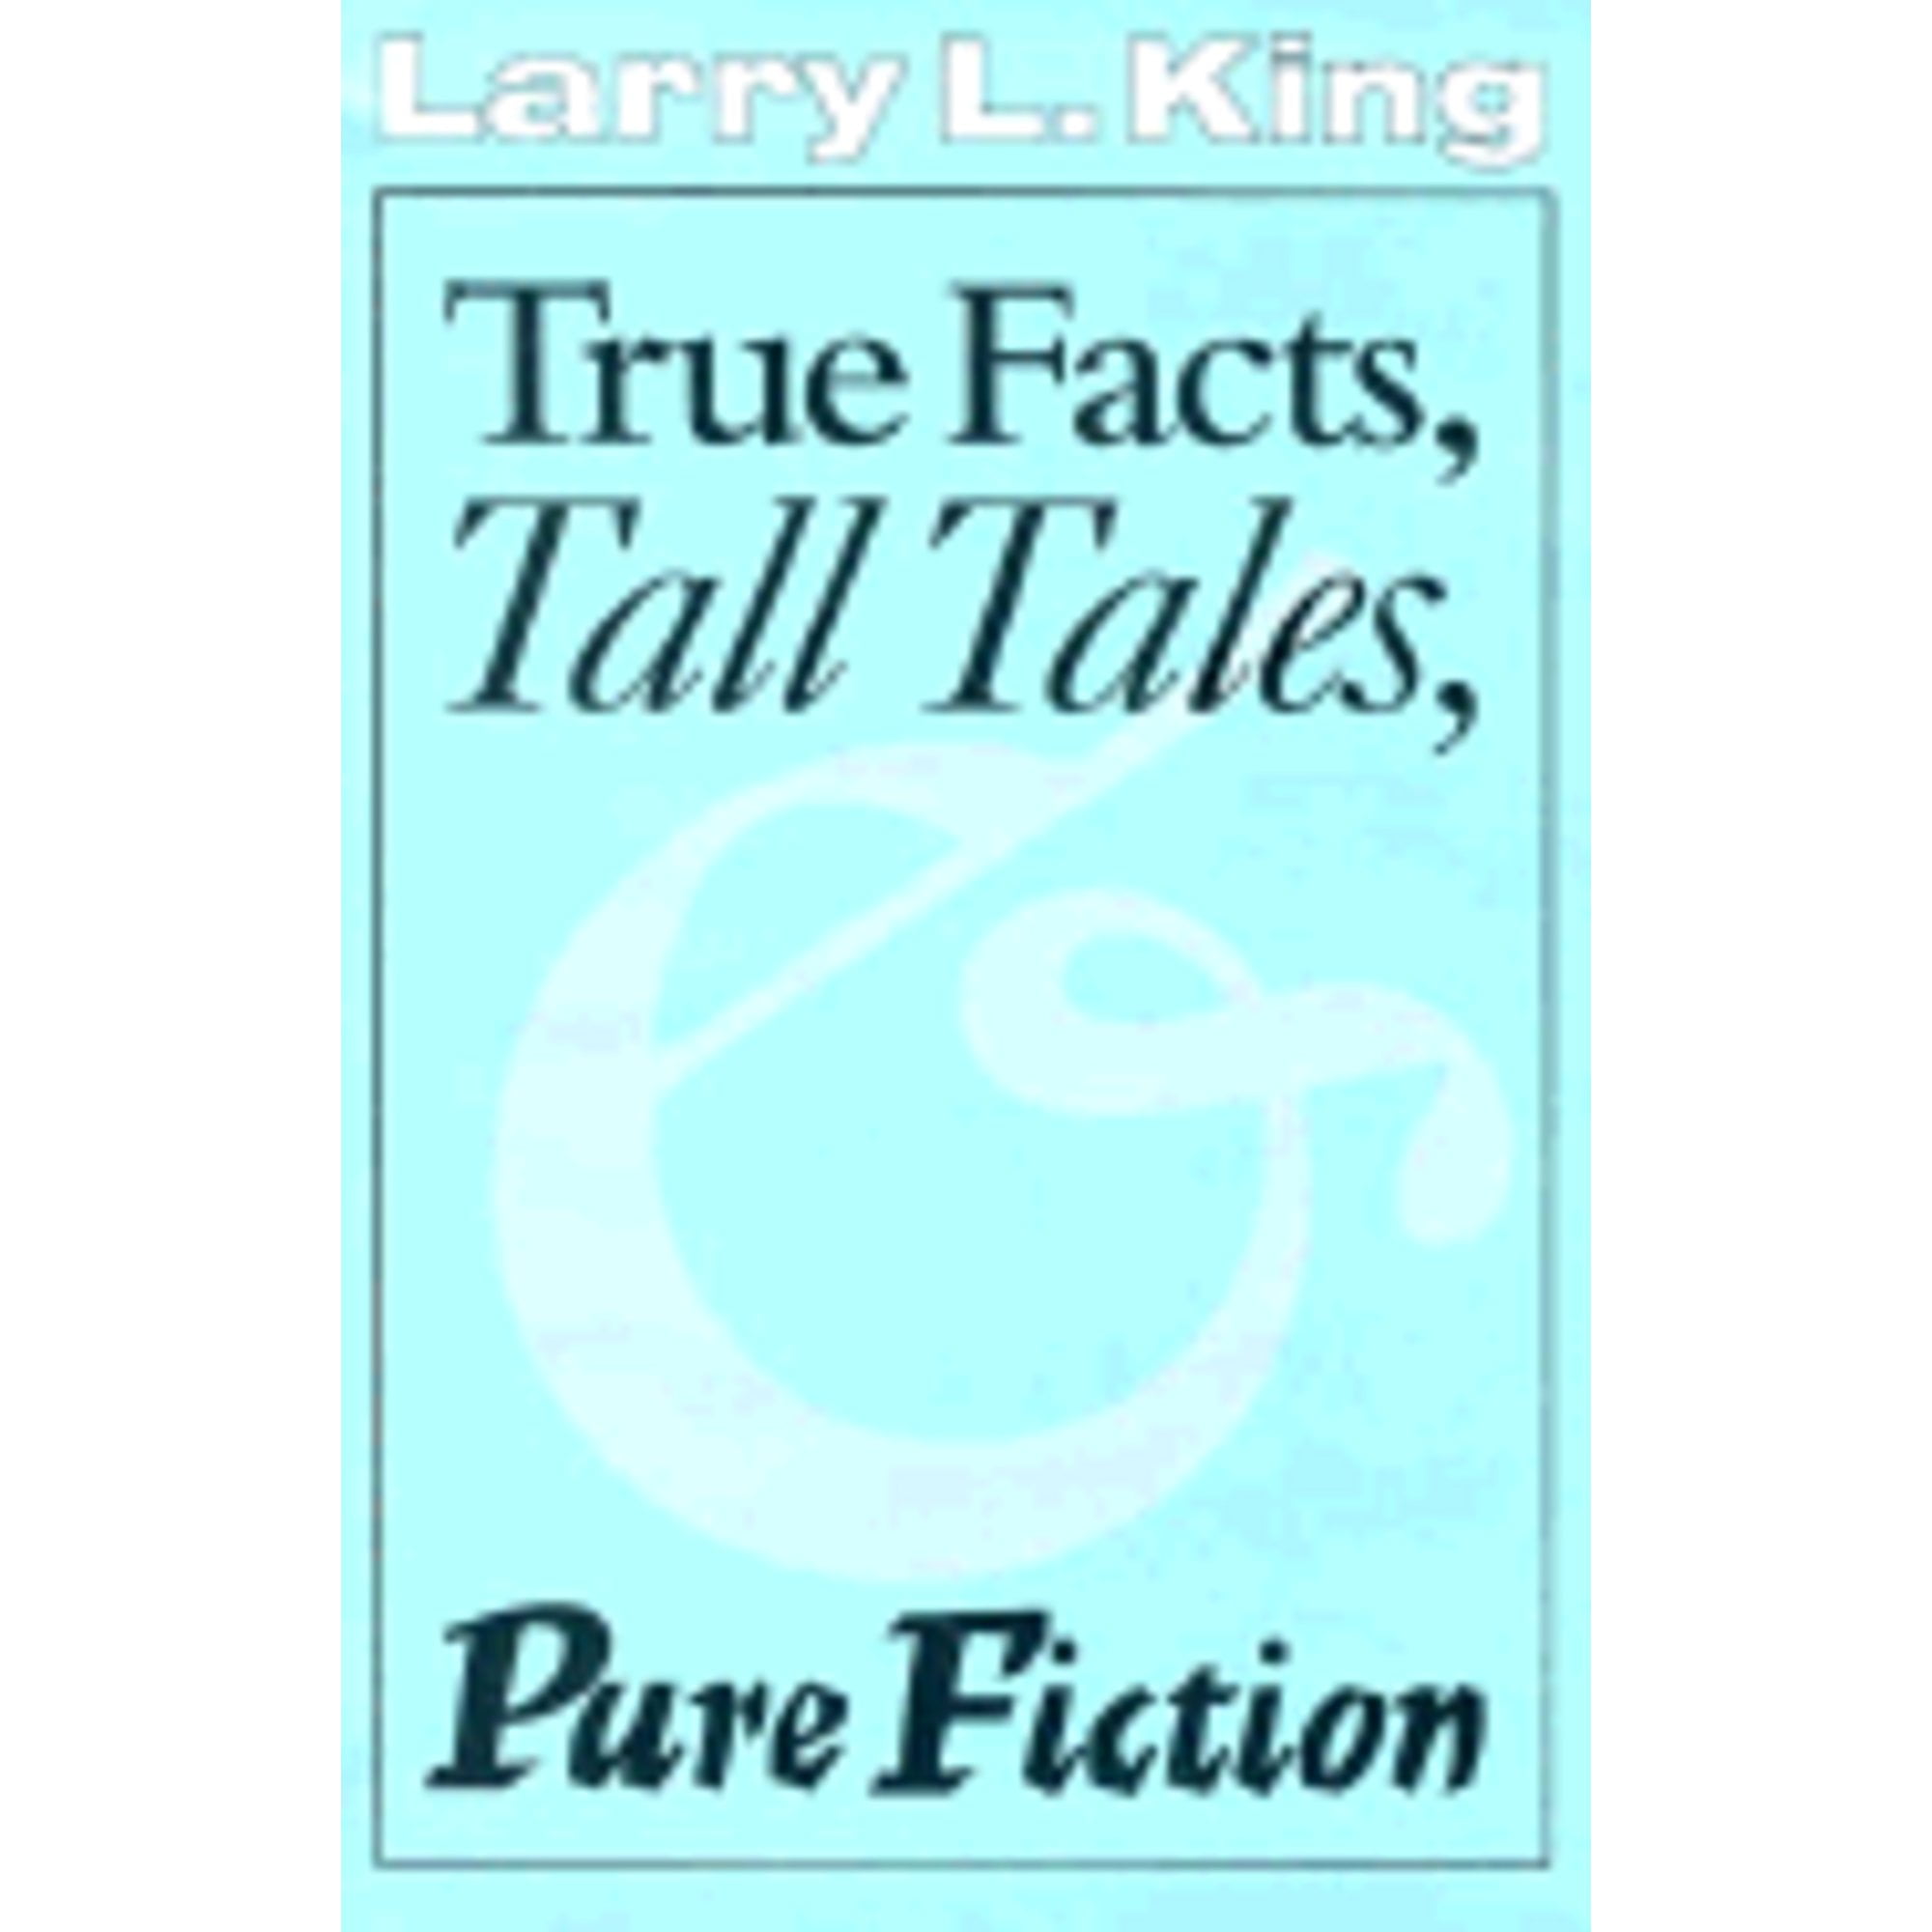 Pre-Owned True Facts, Tall Tales, and Pure Fiction (Pre-Owned Hardcover 9780292743298) by Larry L King, Jim Lehrer